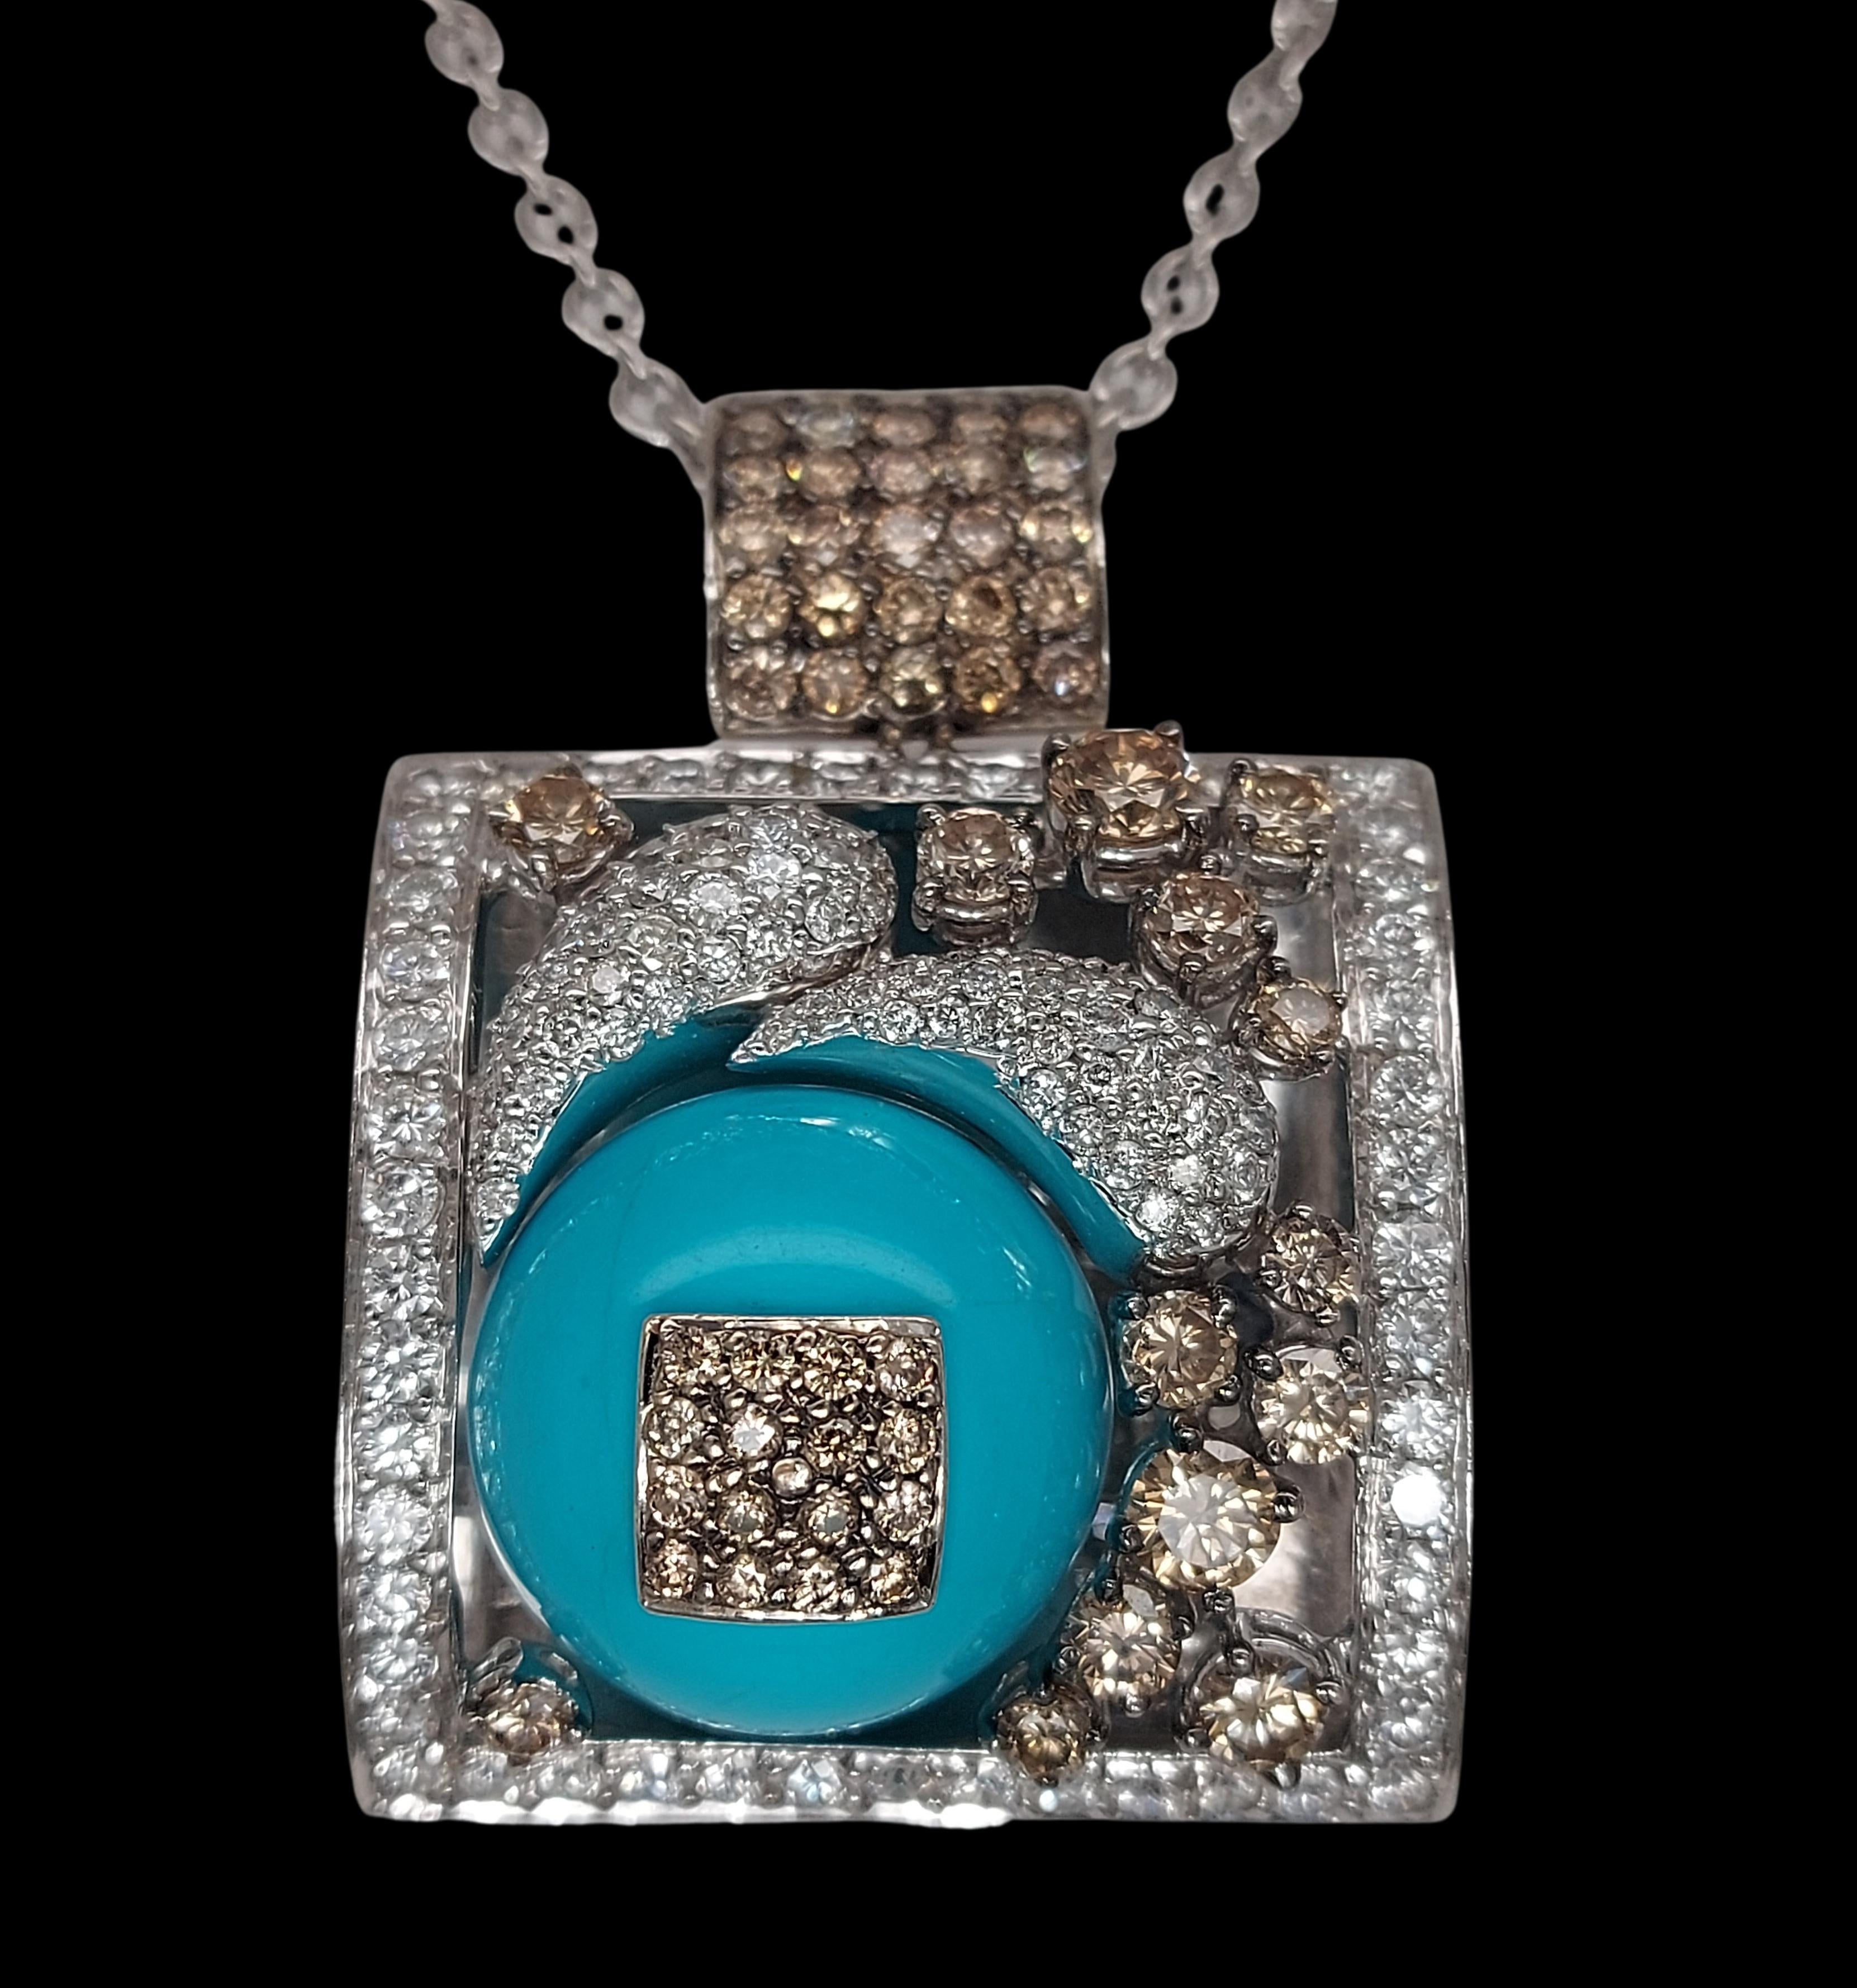 Stunning 18kt White Gold Pendant / Necklace with Turquoise and Diamonds 7